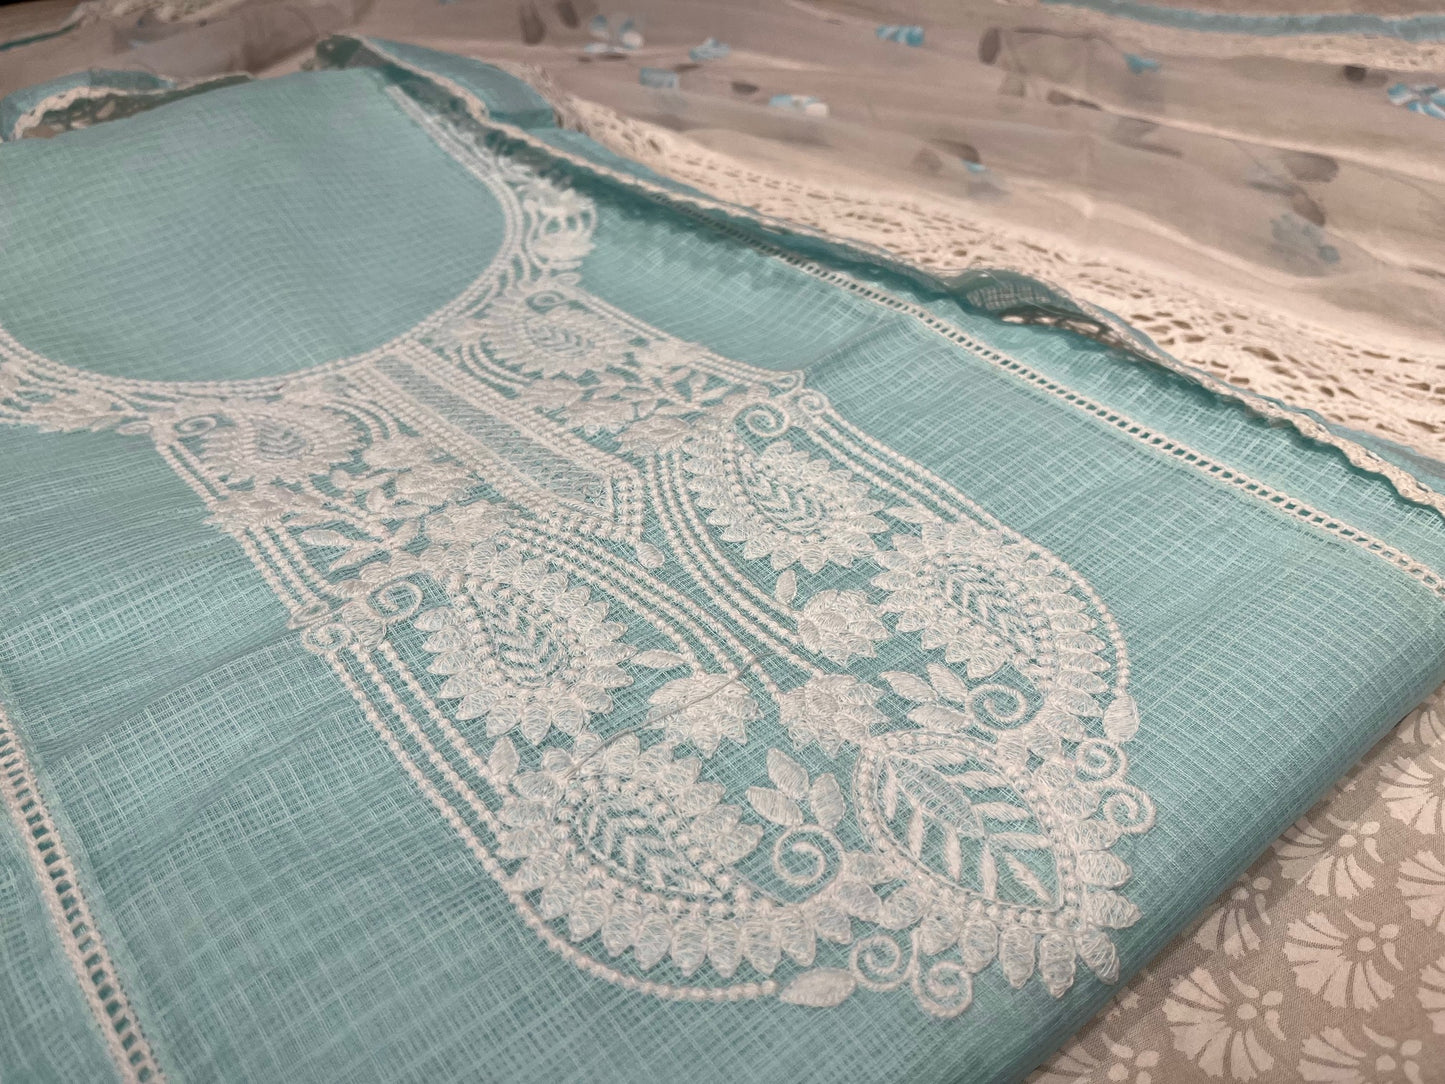 SKY BLUE KOTA DORIA UNSTITCHED SUIT WITH CHIFFON DUPATTA EMBELLISHED WITH THREAD WORK